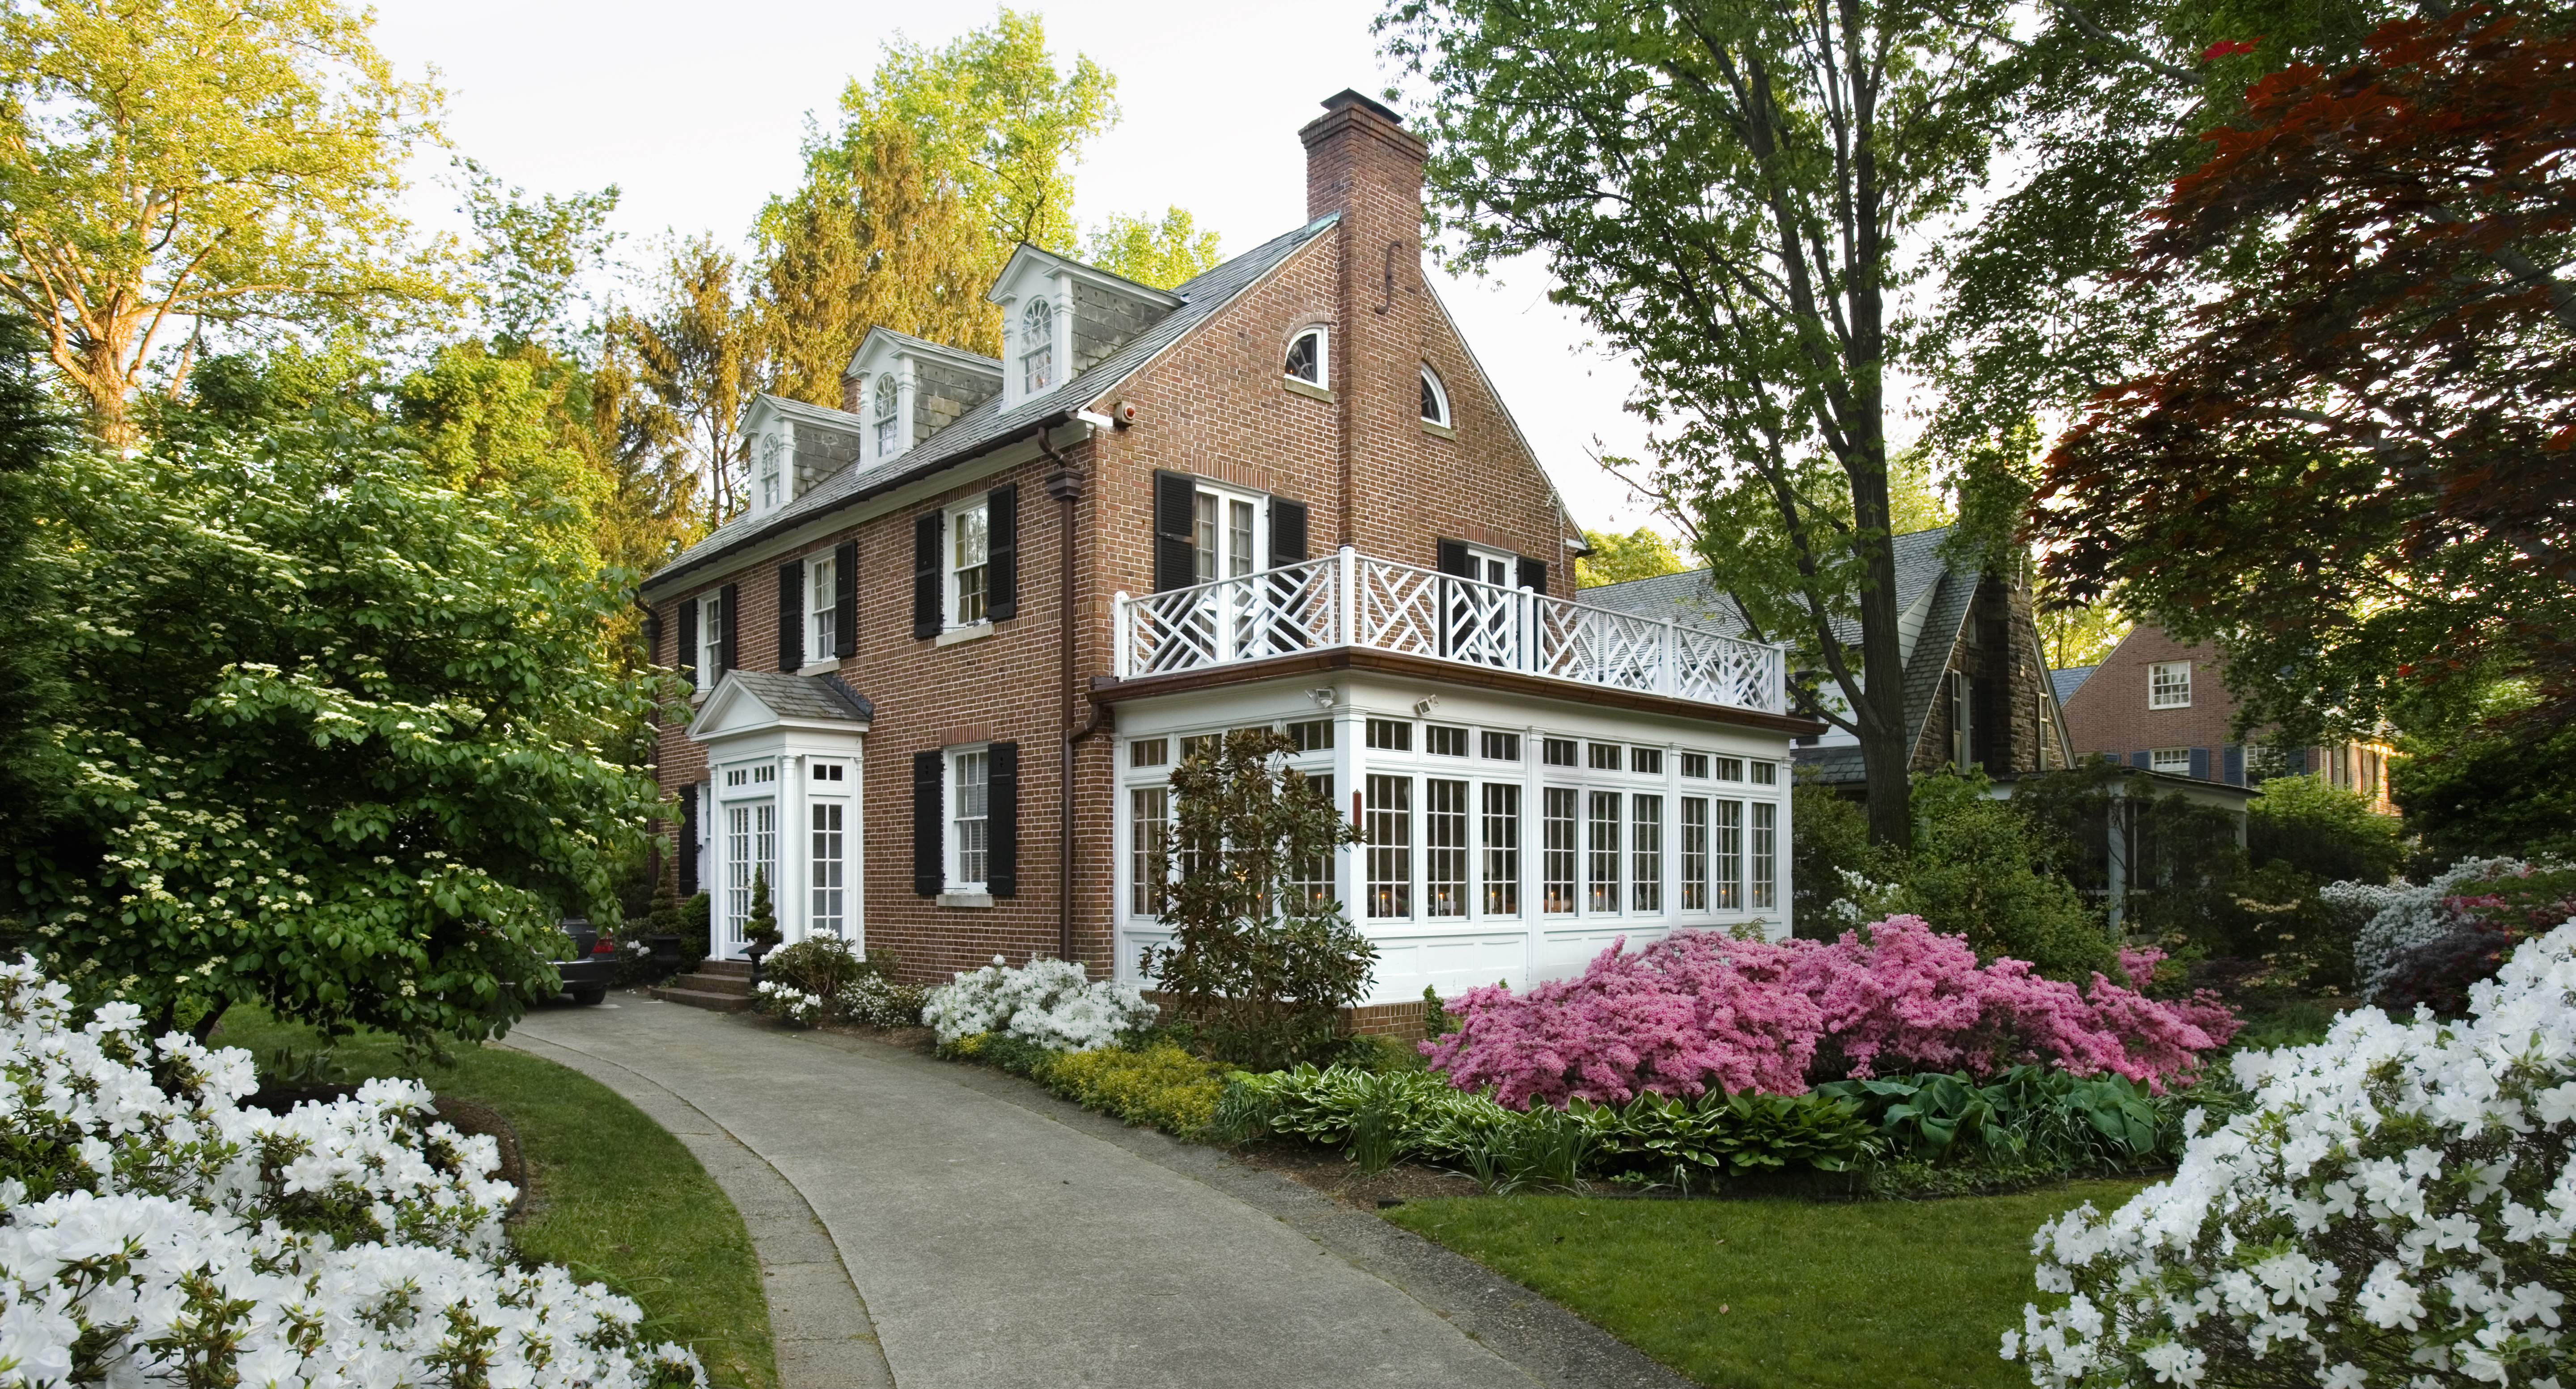 Colonial house on a Spring day | Source: Getty Images